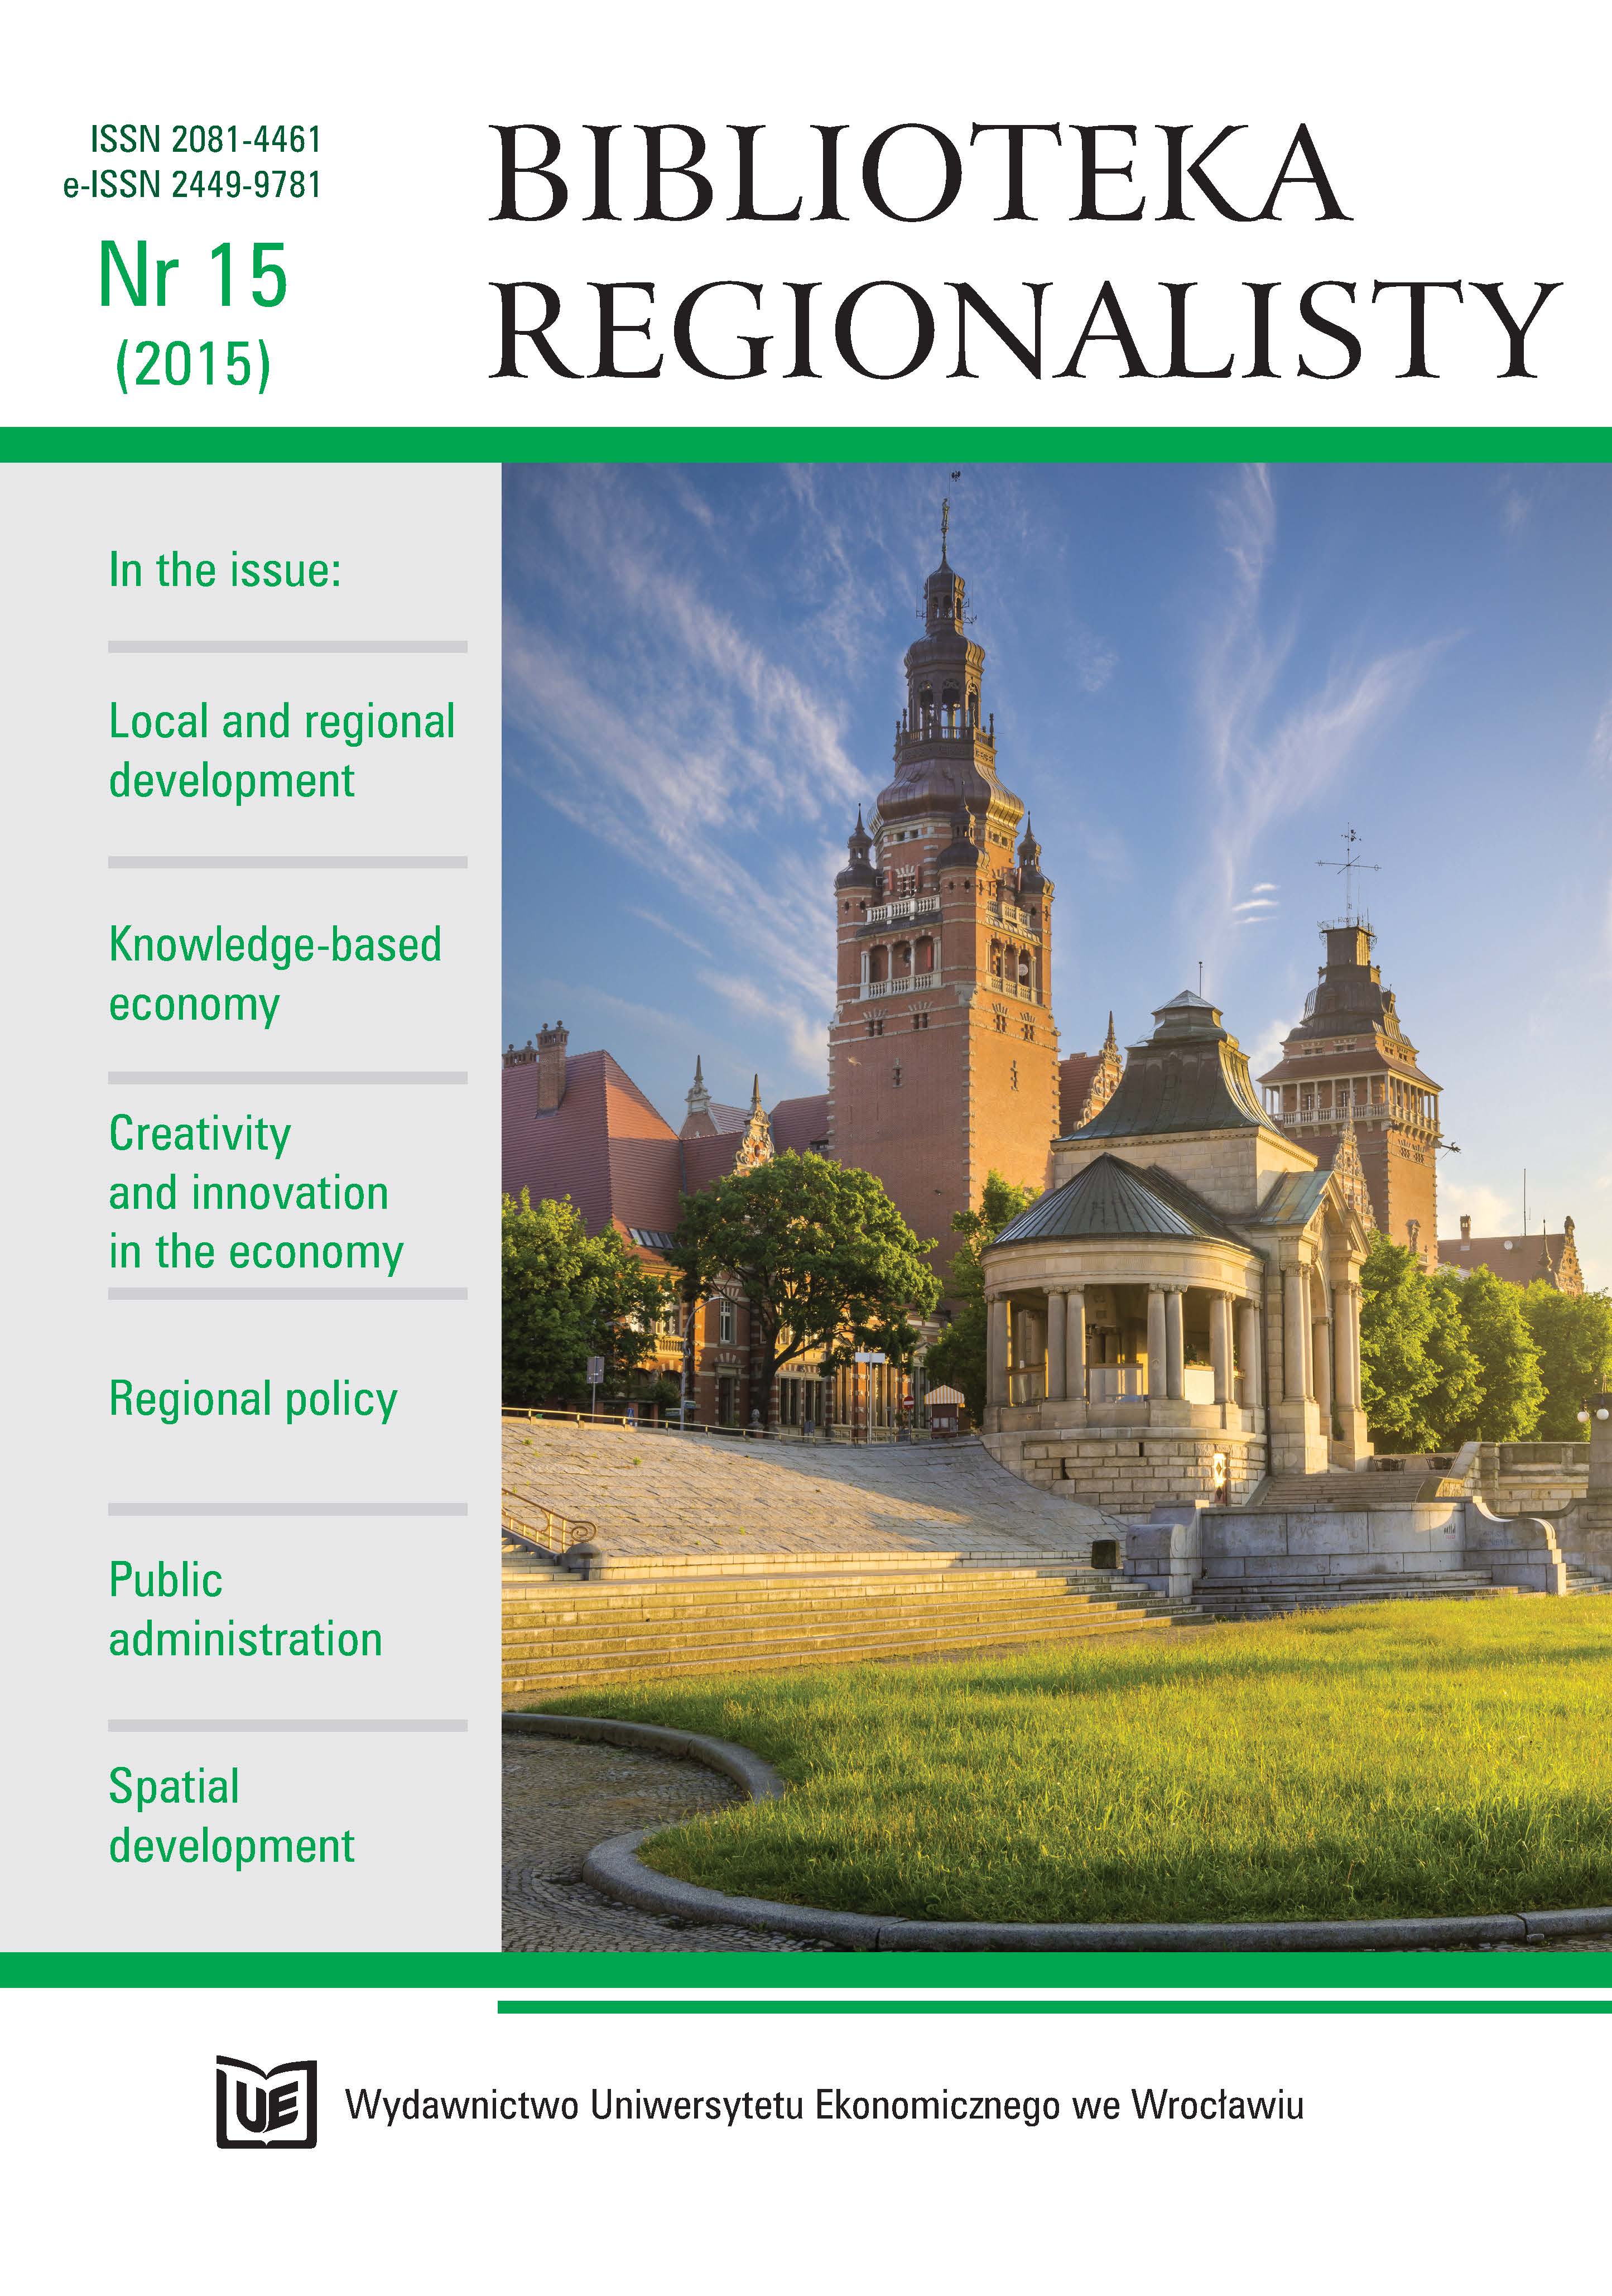 Differentiation of financial autonomy of Polish cities from the perspective of regional development